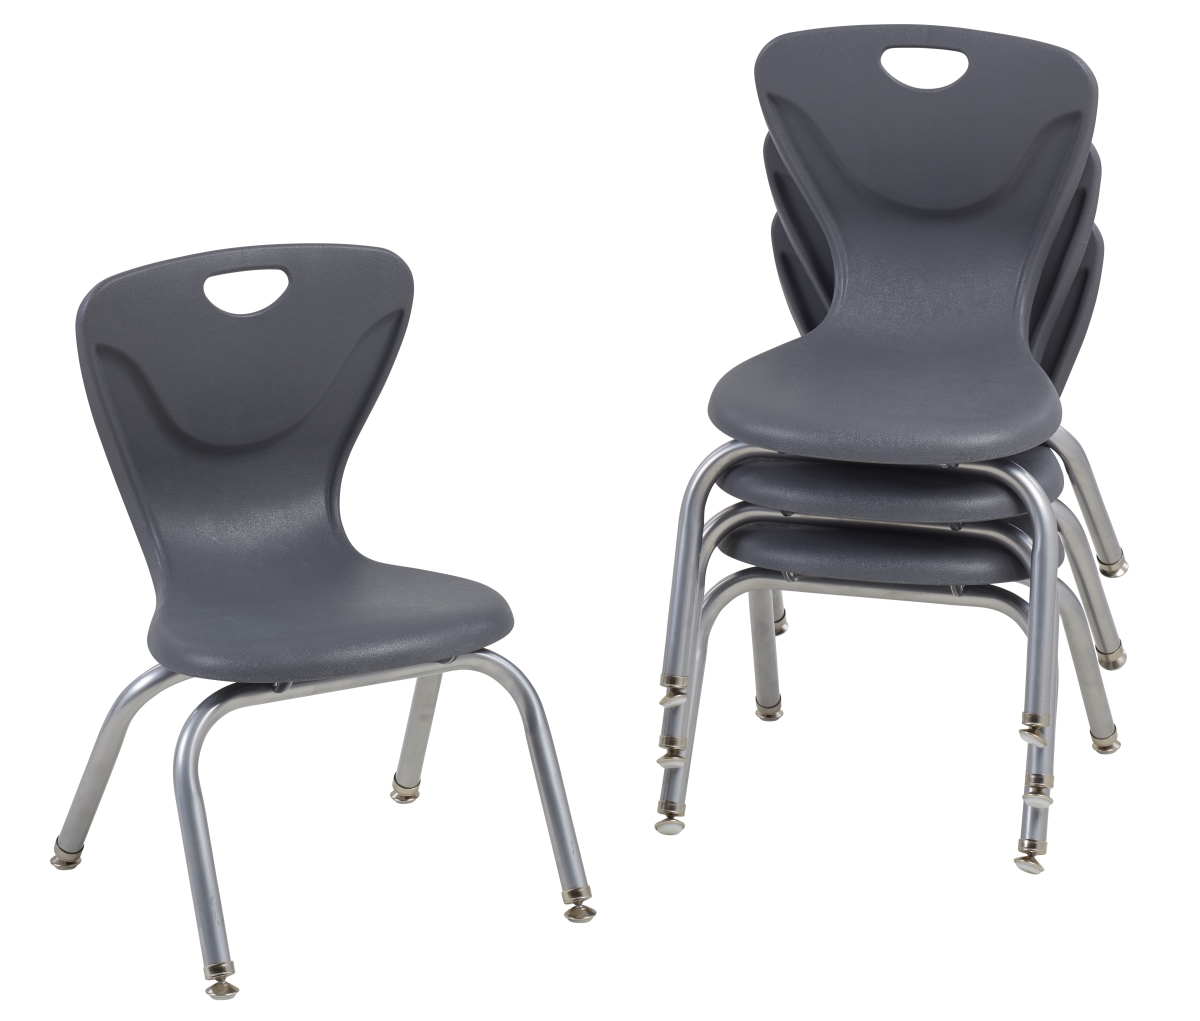 10373-gy 12 In. Contour Chair With Swivel Glide - Grey - Pack Of 4